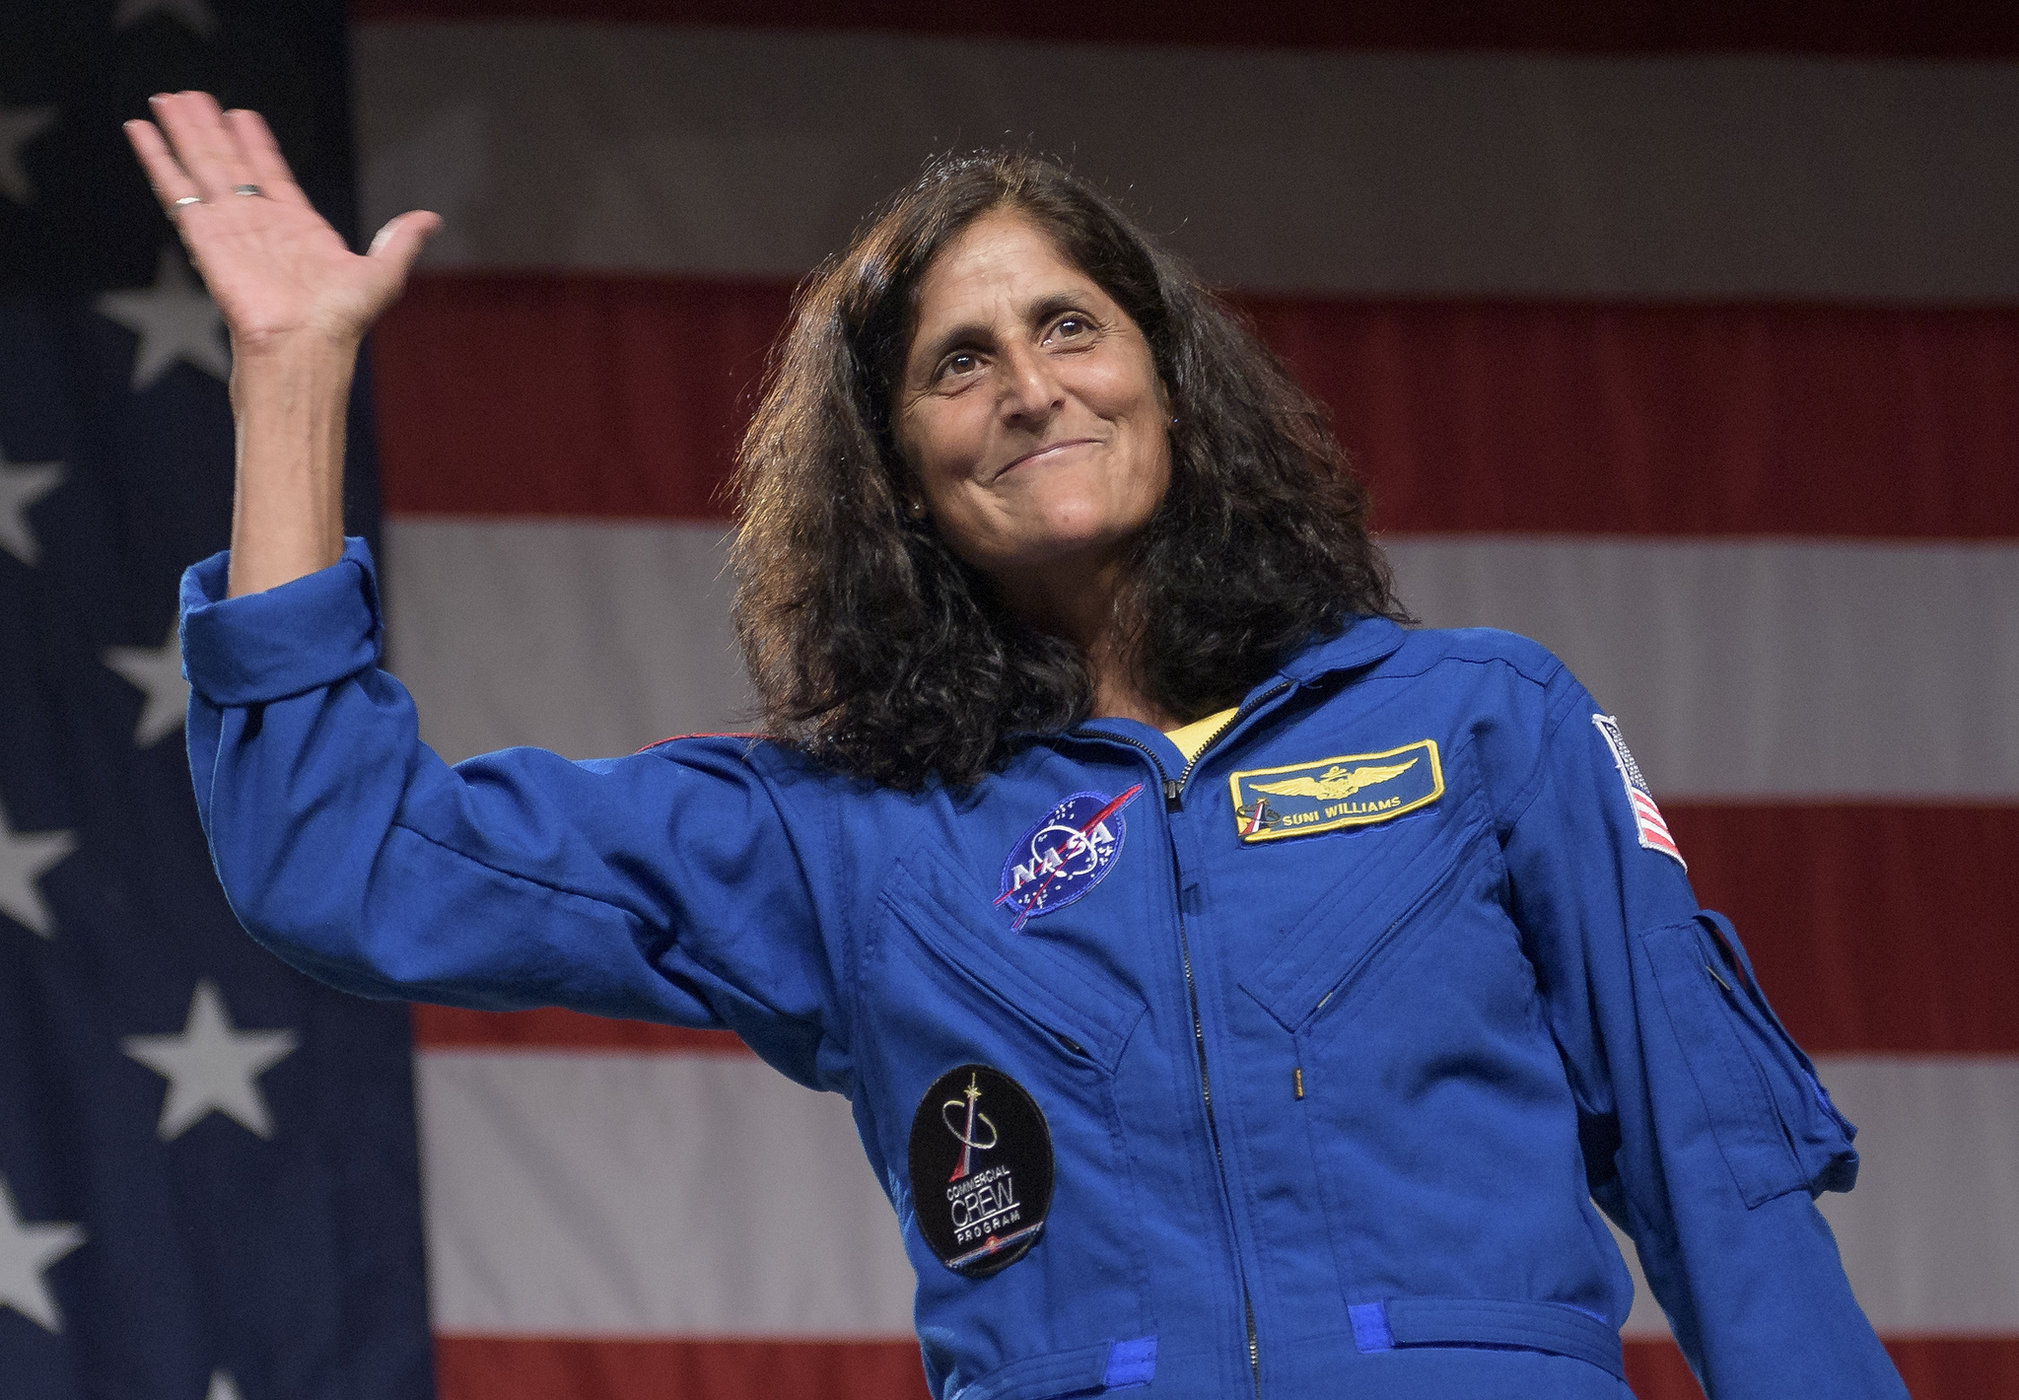 These 9 Astronauts Will Fly the 1st Flights on SpaceX and Boeing Spaceships